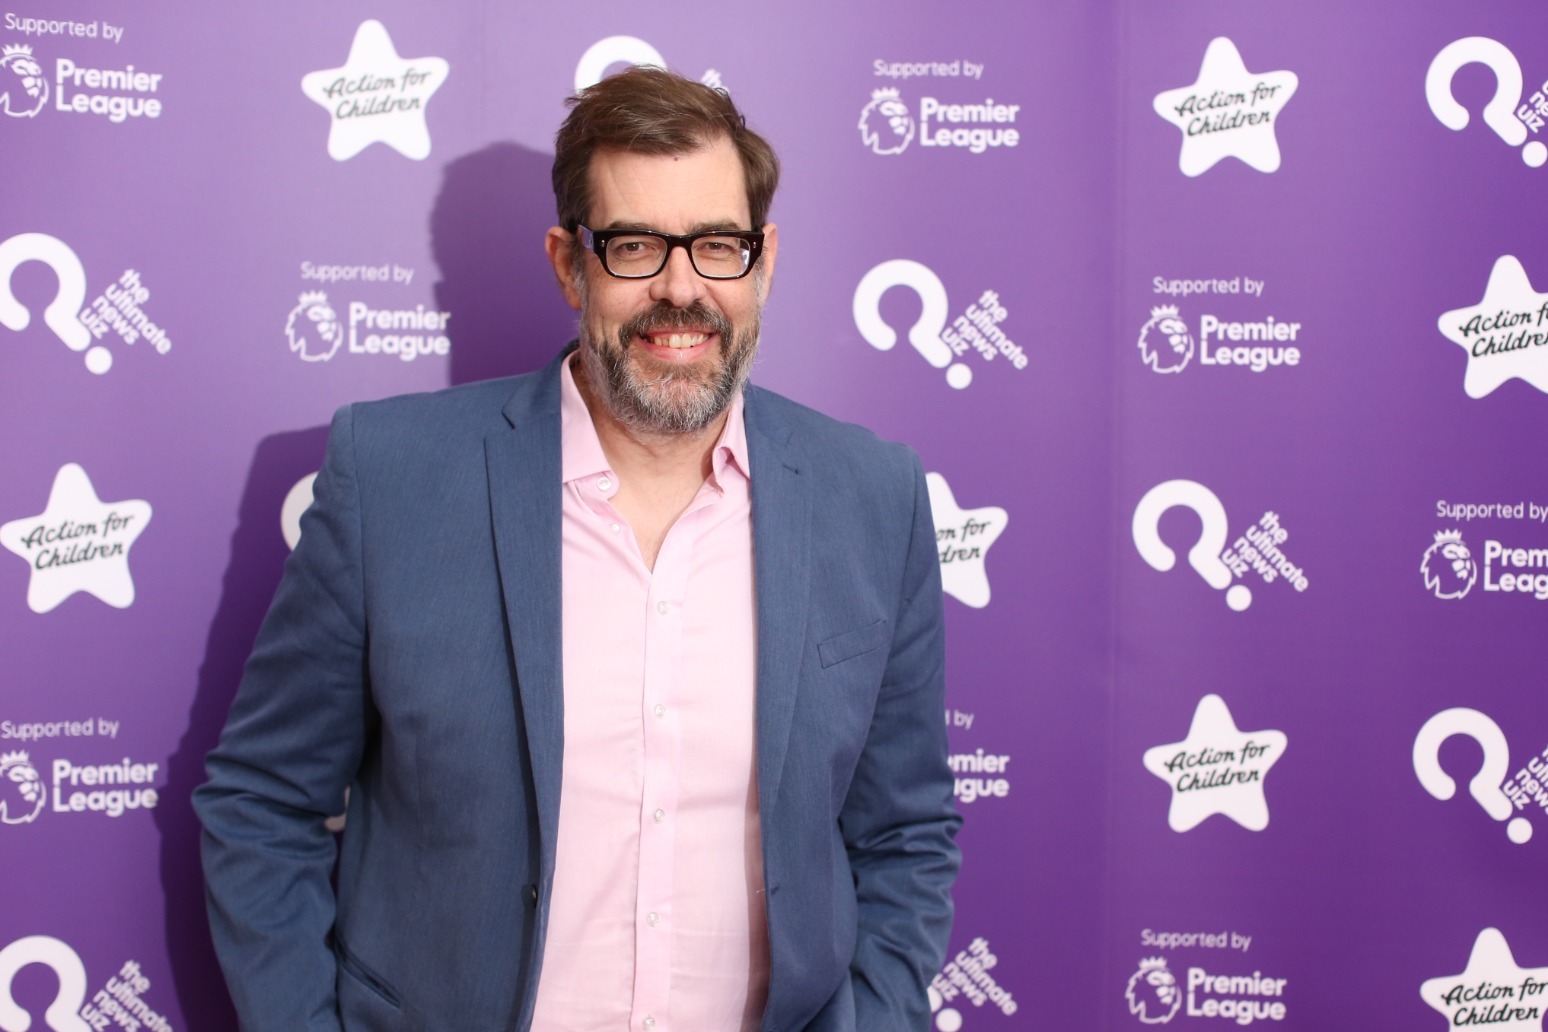 Richard Osman quitting Pointless after 13 years